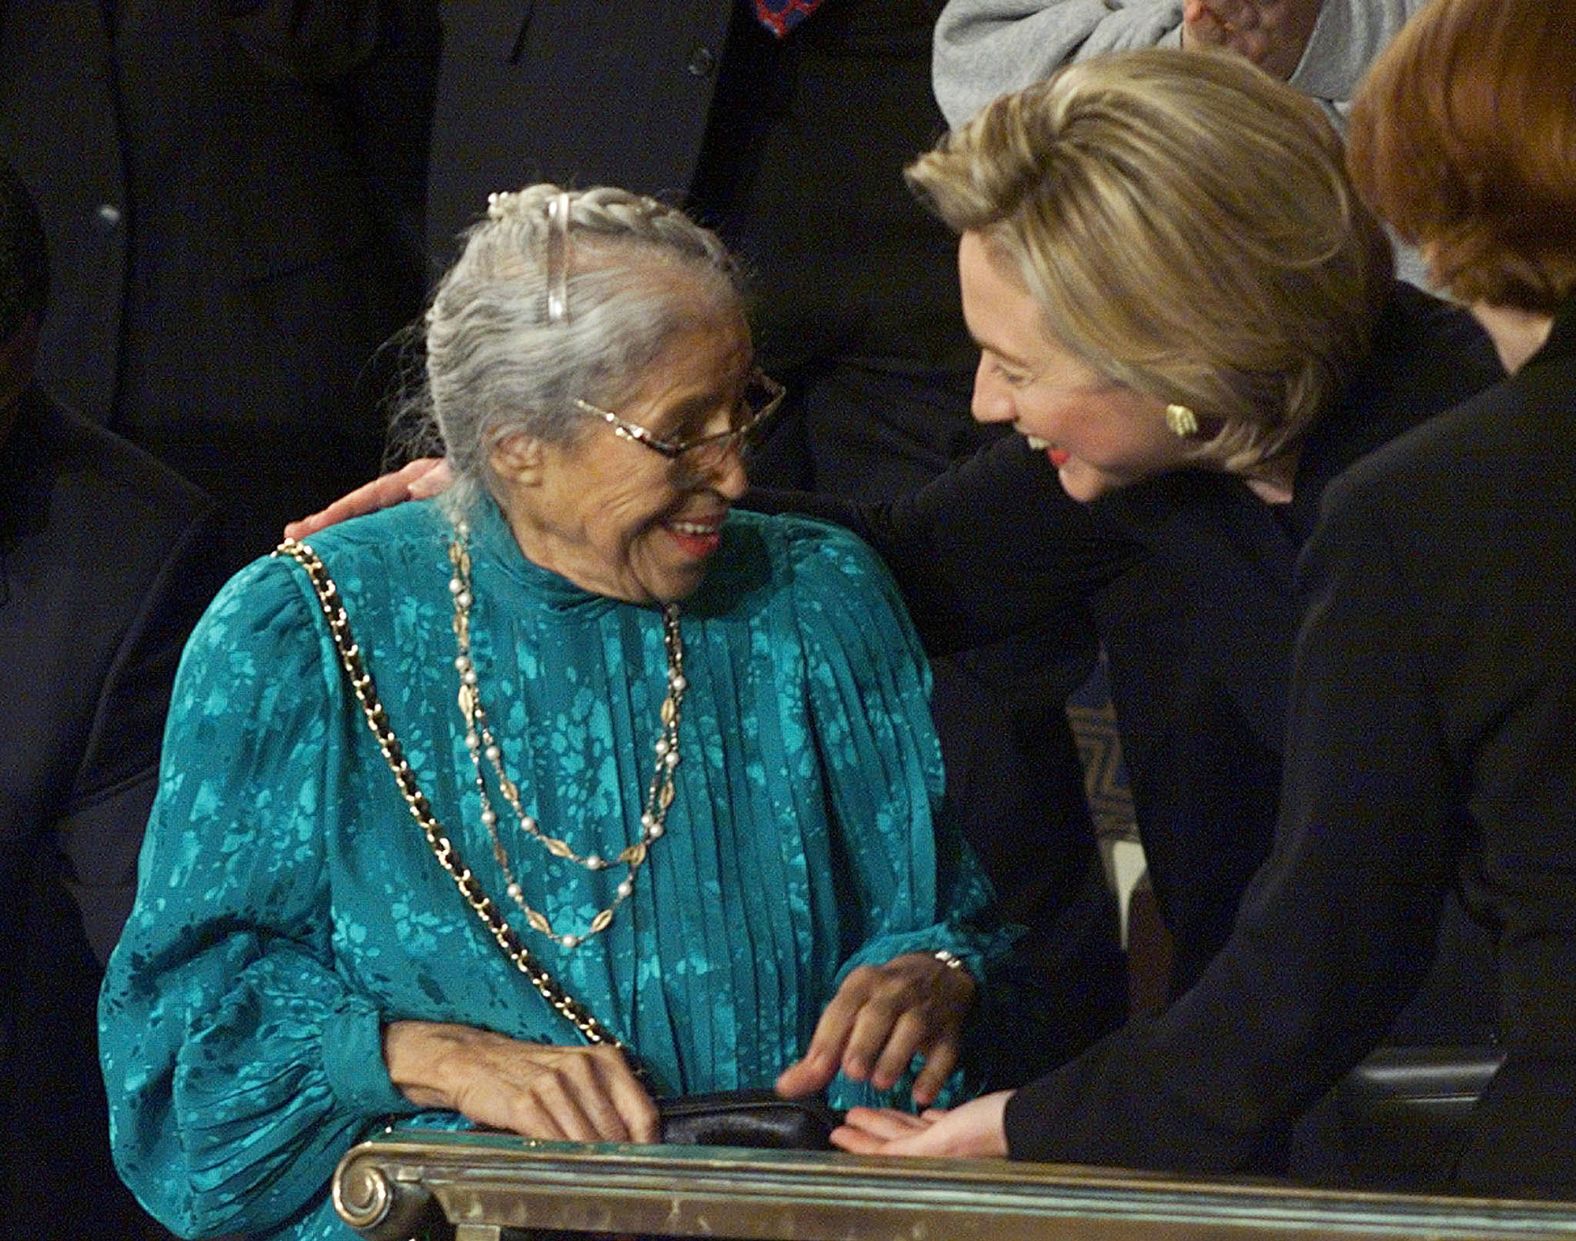 Hillary Clinton greets civil rights pioneer <a href="index.php?page=&url=https%3A%2F%2Fwww.cnn.com%2F2020%2F12%2F01%2Fus%2Frosa-parks-anniversary-2020-trnd%2Findex.html" target="_blank">Rosa Parks</a> during President Clinton's 1999 State of the Union address. 